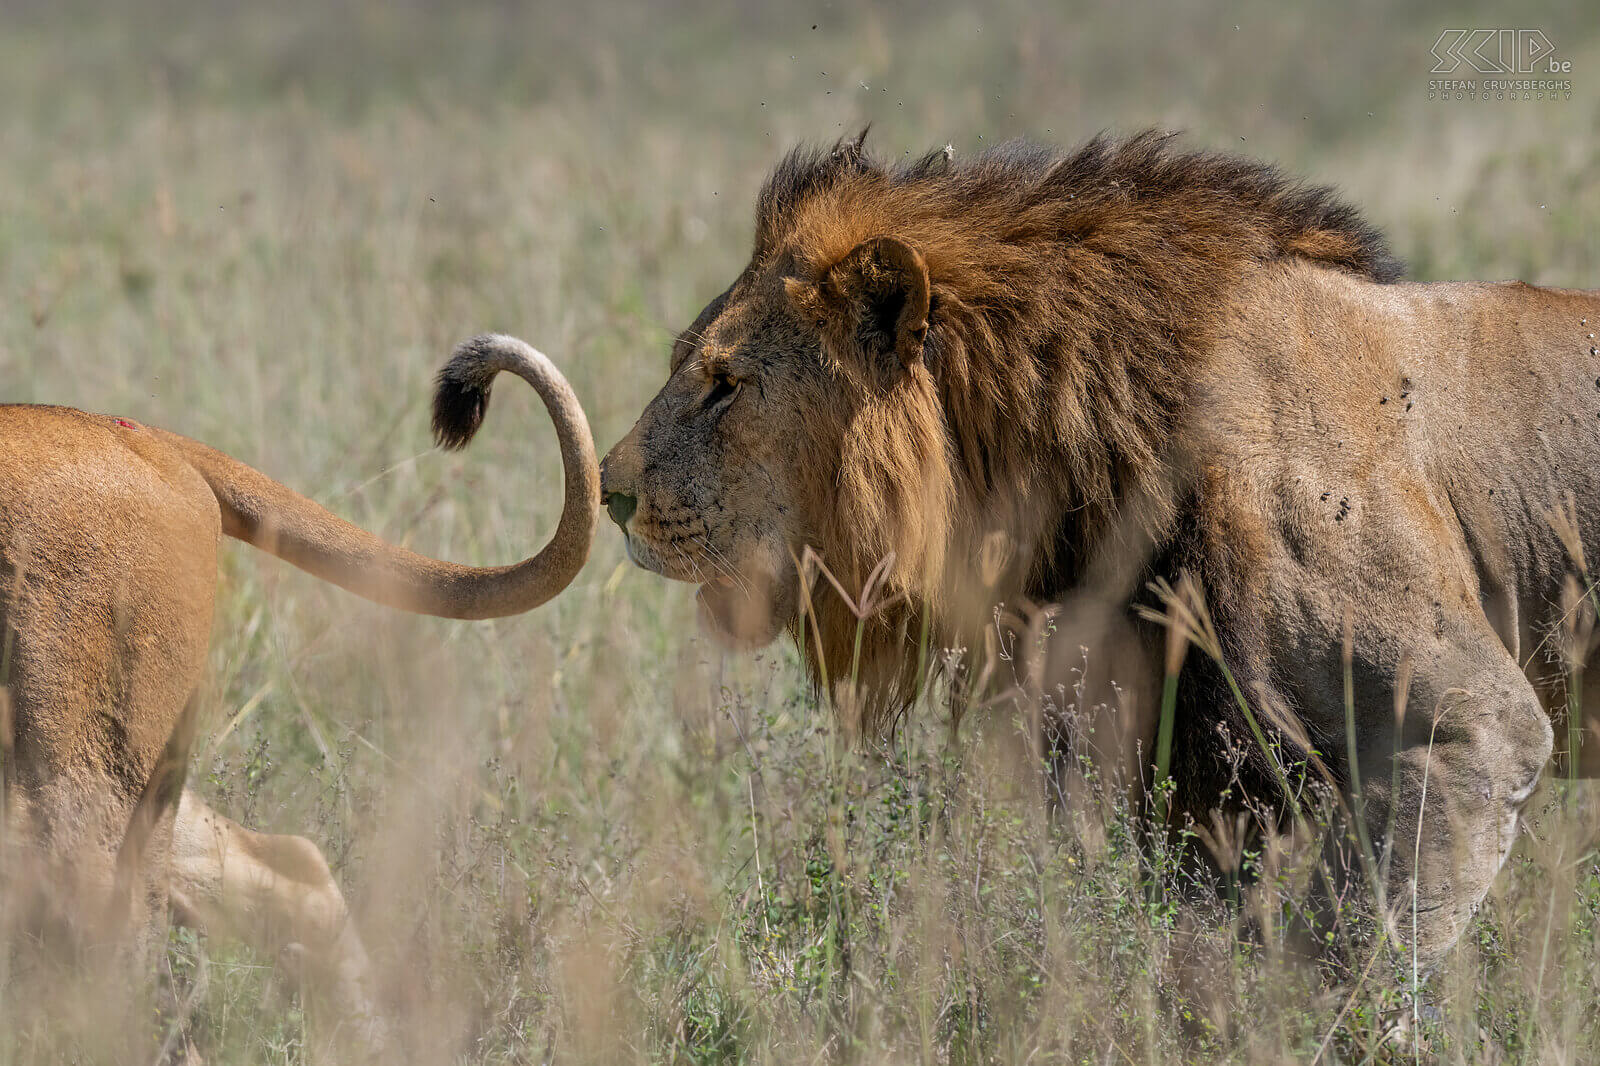 Nakuru NP - Lions Even the king of the jungle obediently follows his lady. Stefan Cruysberghs